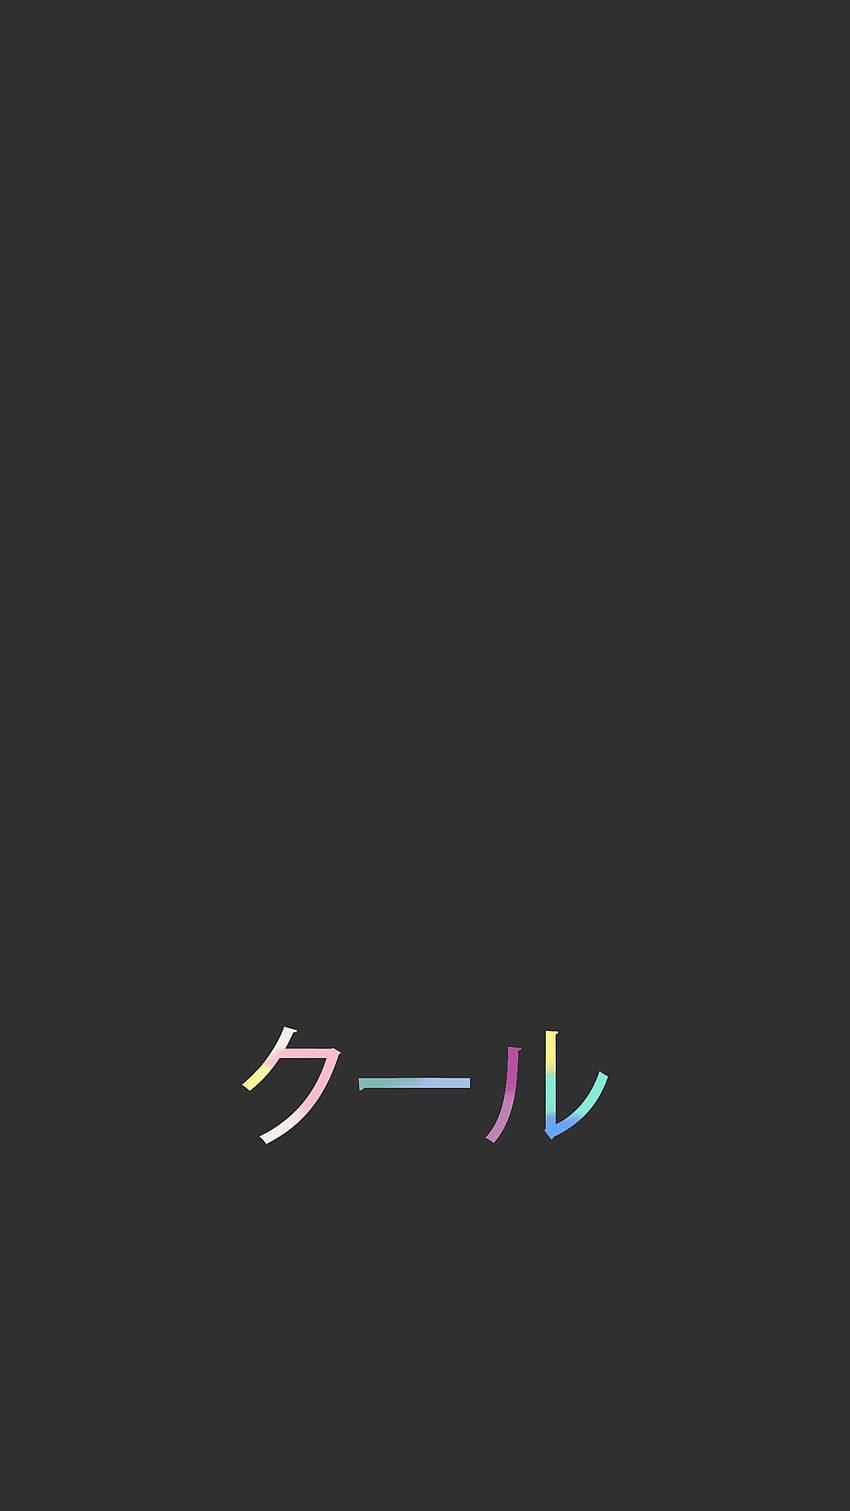 Share More Than Minimalist Japanese Wallpaper Latest In Cdgdbentre